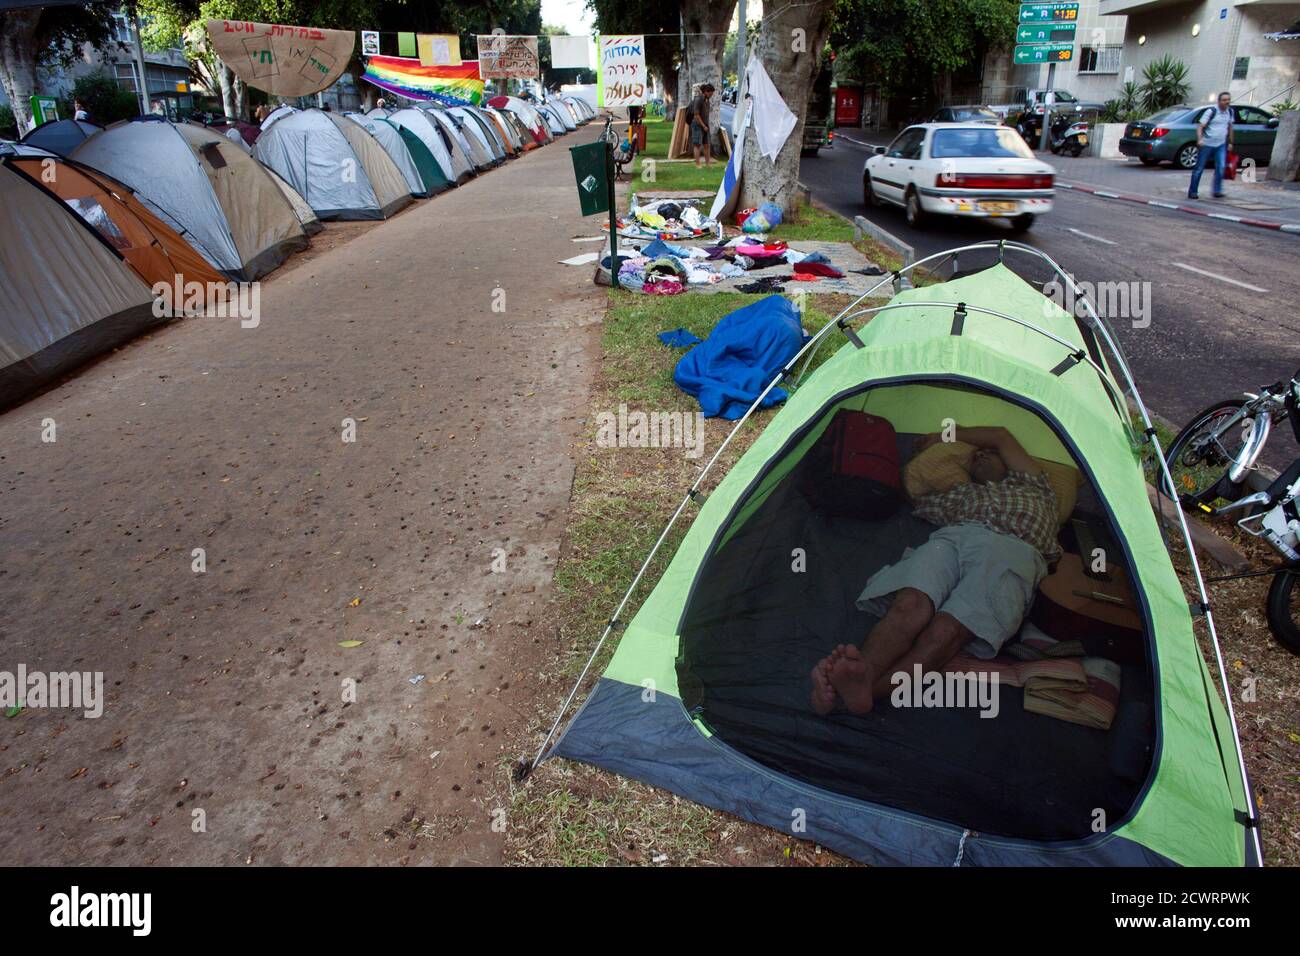 An Israeli protester sleeps inside his tent pitched on Tel Aviv's Rothschild Boulevard as he takes part in a demonstration against high housing prices, July 18, 2011. Similar protests have been planned in other Israeli cities where rental costs have skyrocketed as a result of a shortage in available dwellings in primary locations. REUTERS/Nir Elias (ISRAEL - Tags: POLITICS BUSINESS SOCIETY) Stock Photo